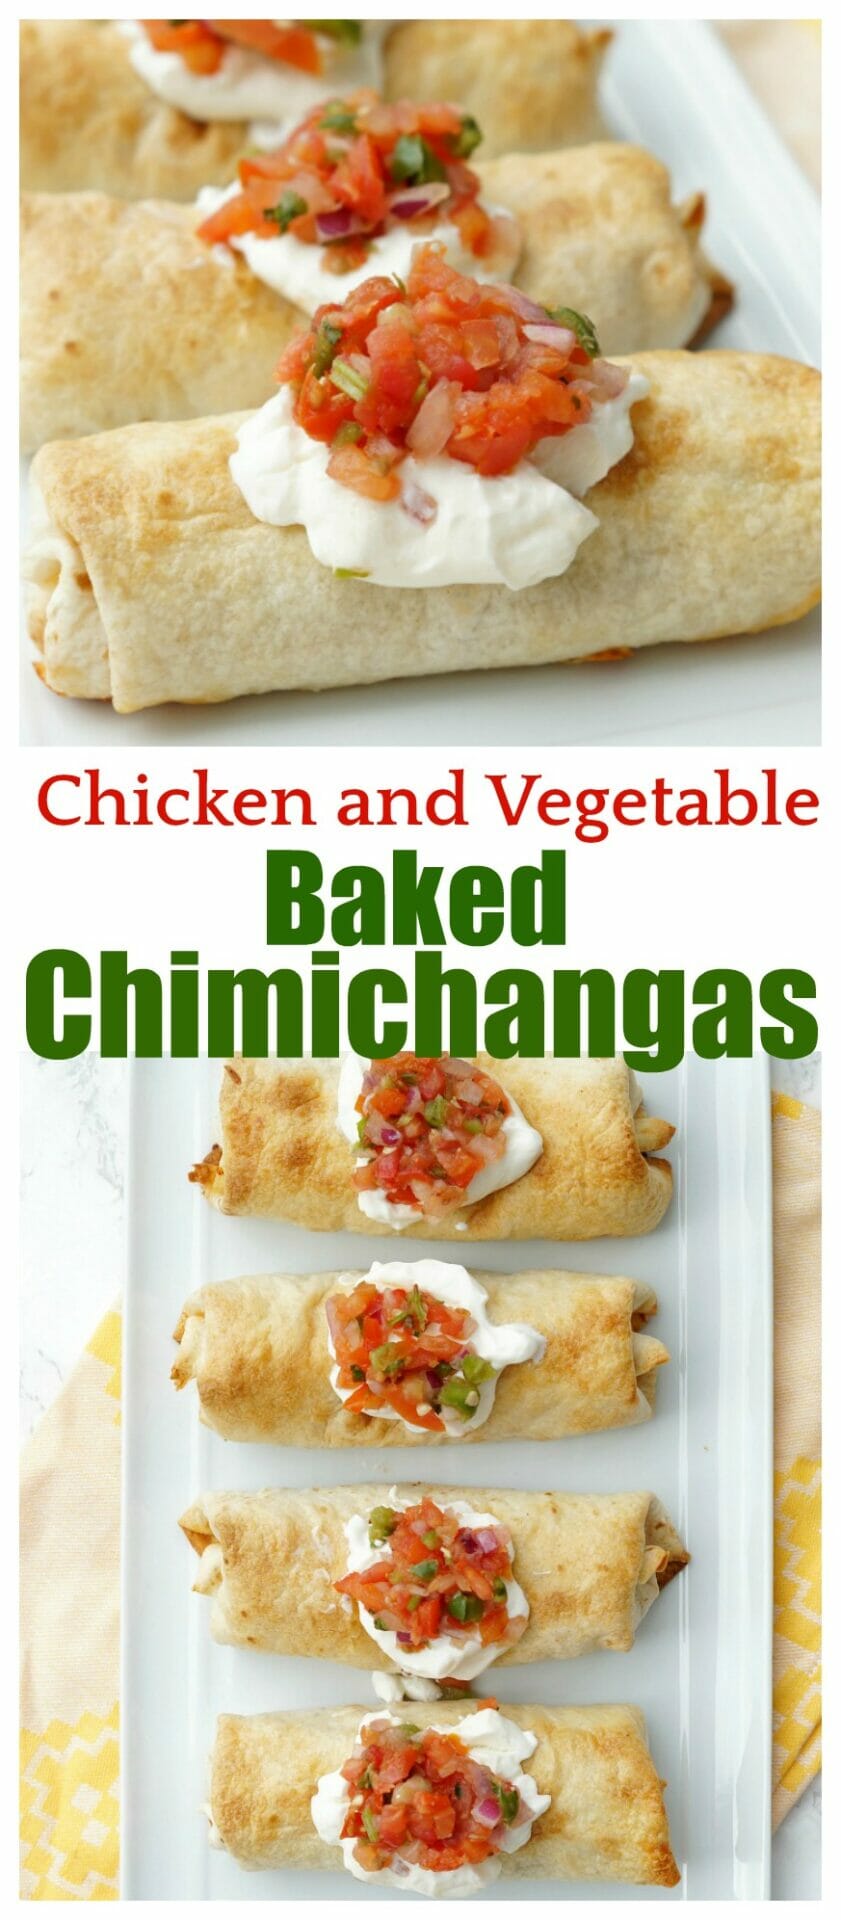 Baked Chicken and Vegetable Chimichangas, a healthier take on a Mexican restaurant classic! 